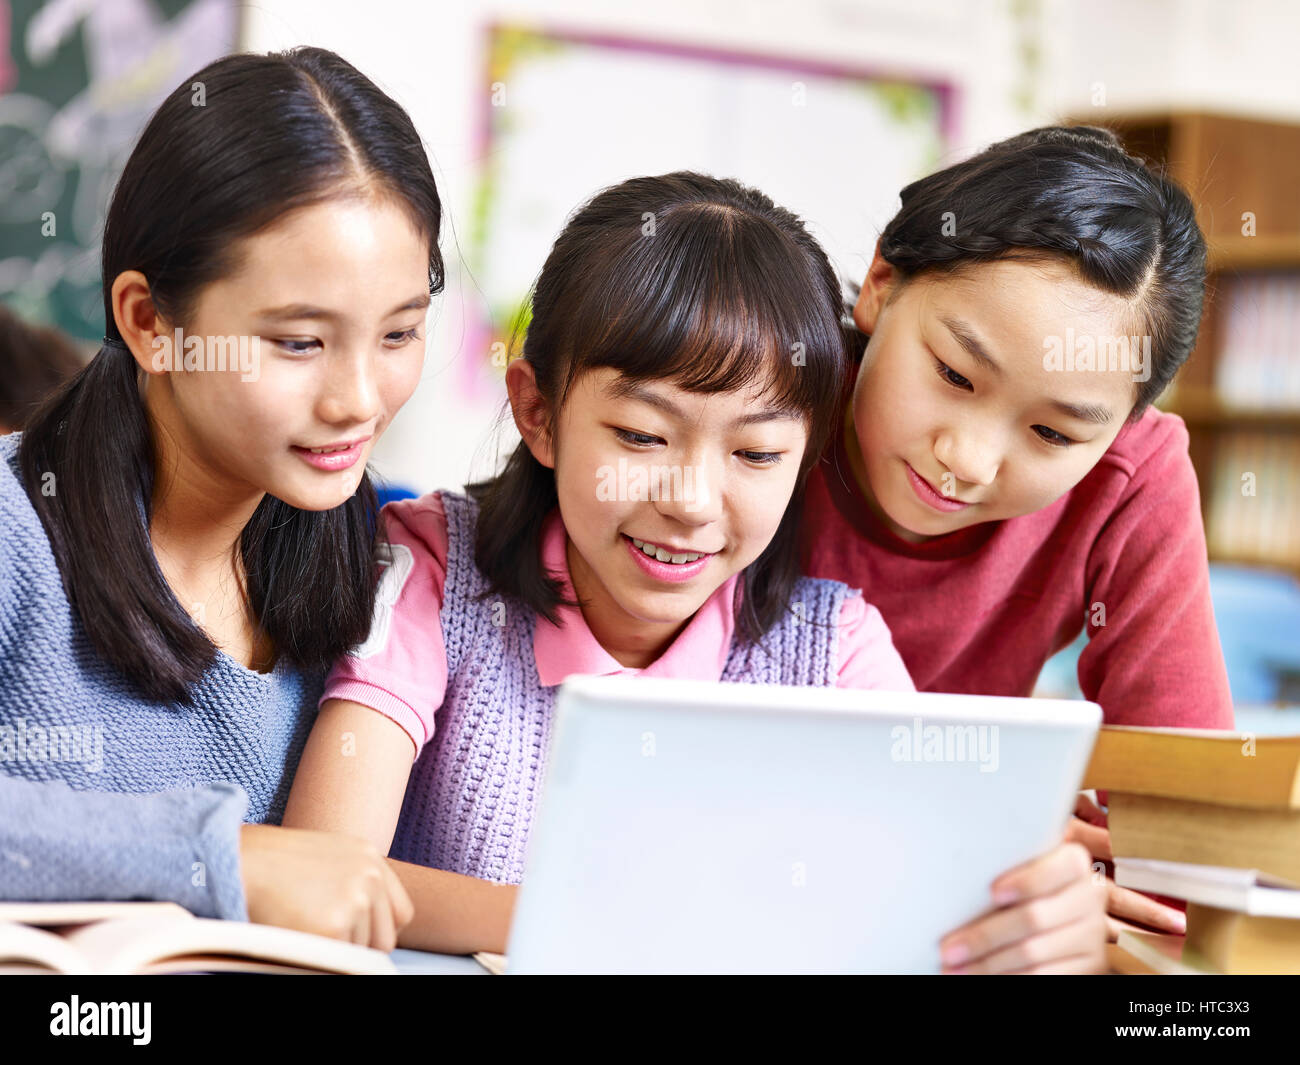 three asian elementary school girls friends looking at a tablet together during break in classroom. Stock Photo